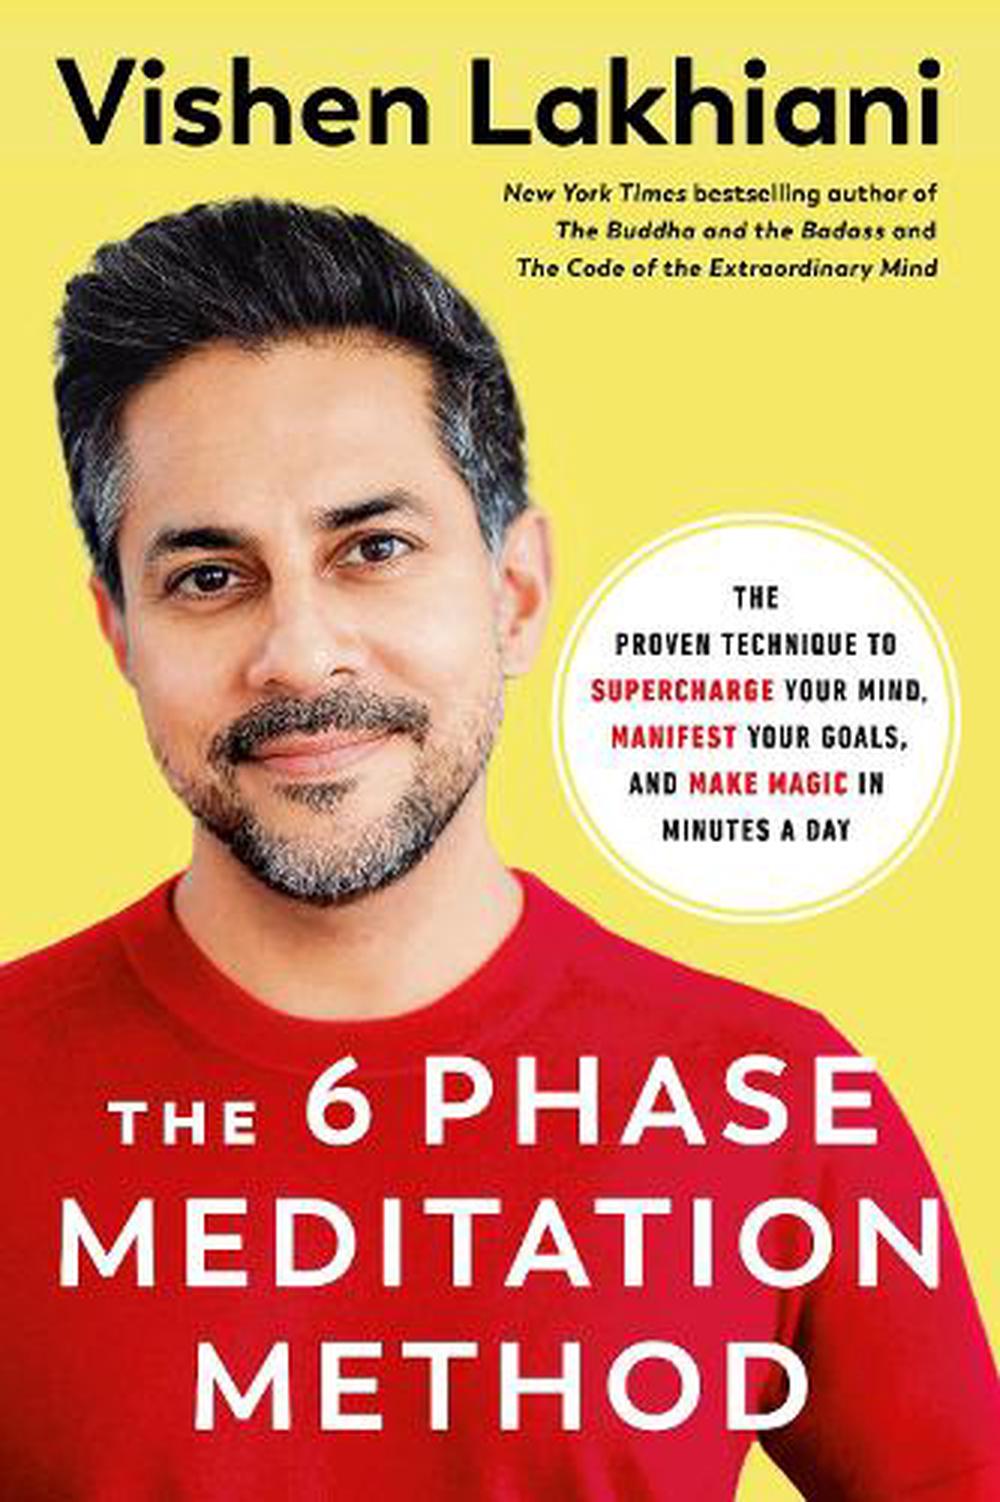 The 6 Phase Meditation Method : The Proven Technique to Supercharge Your Mind, Manifest Your Goals, and Make Magic in Minutes a Day (Hardcover) - image 1 of 1